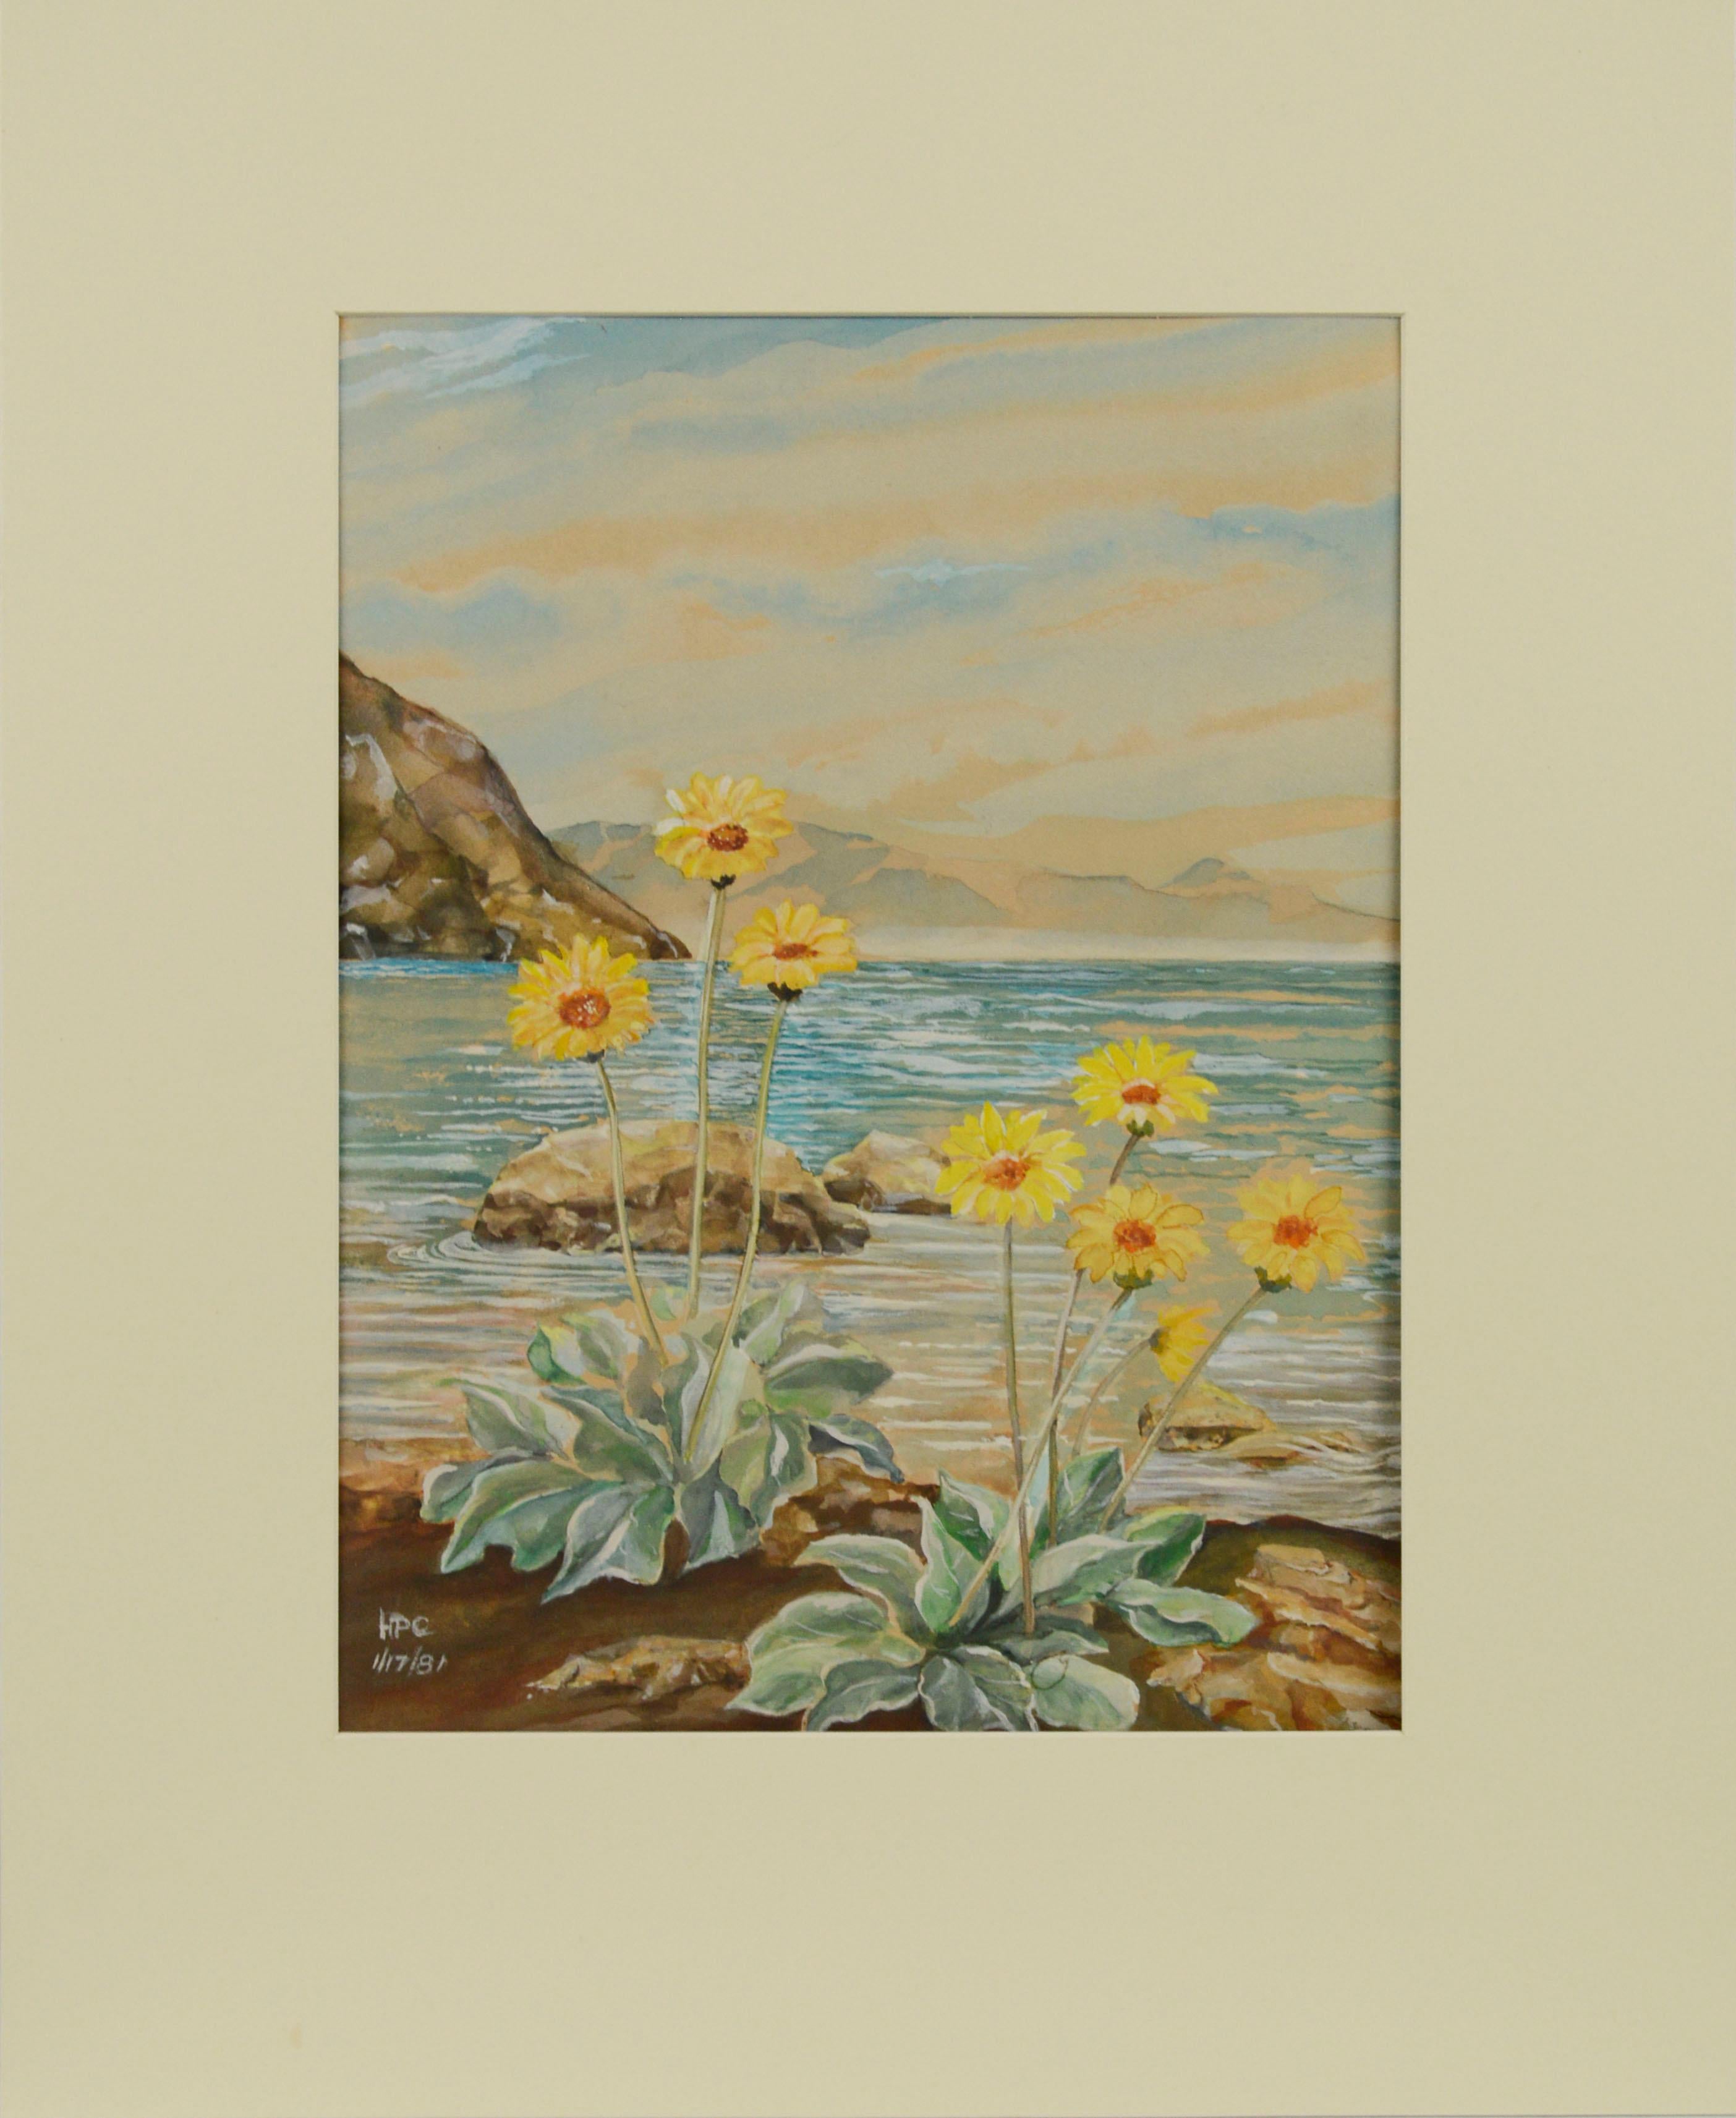 Unknown Landscape Painting - Flowers on the Beach, Botanical Watercolor Landscape 